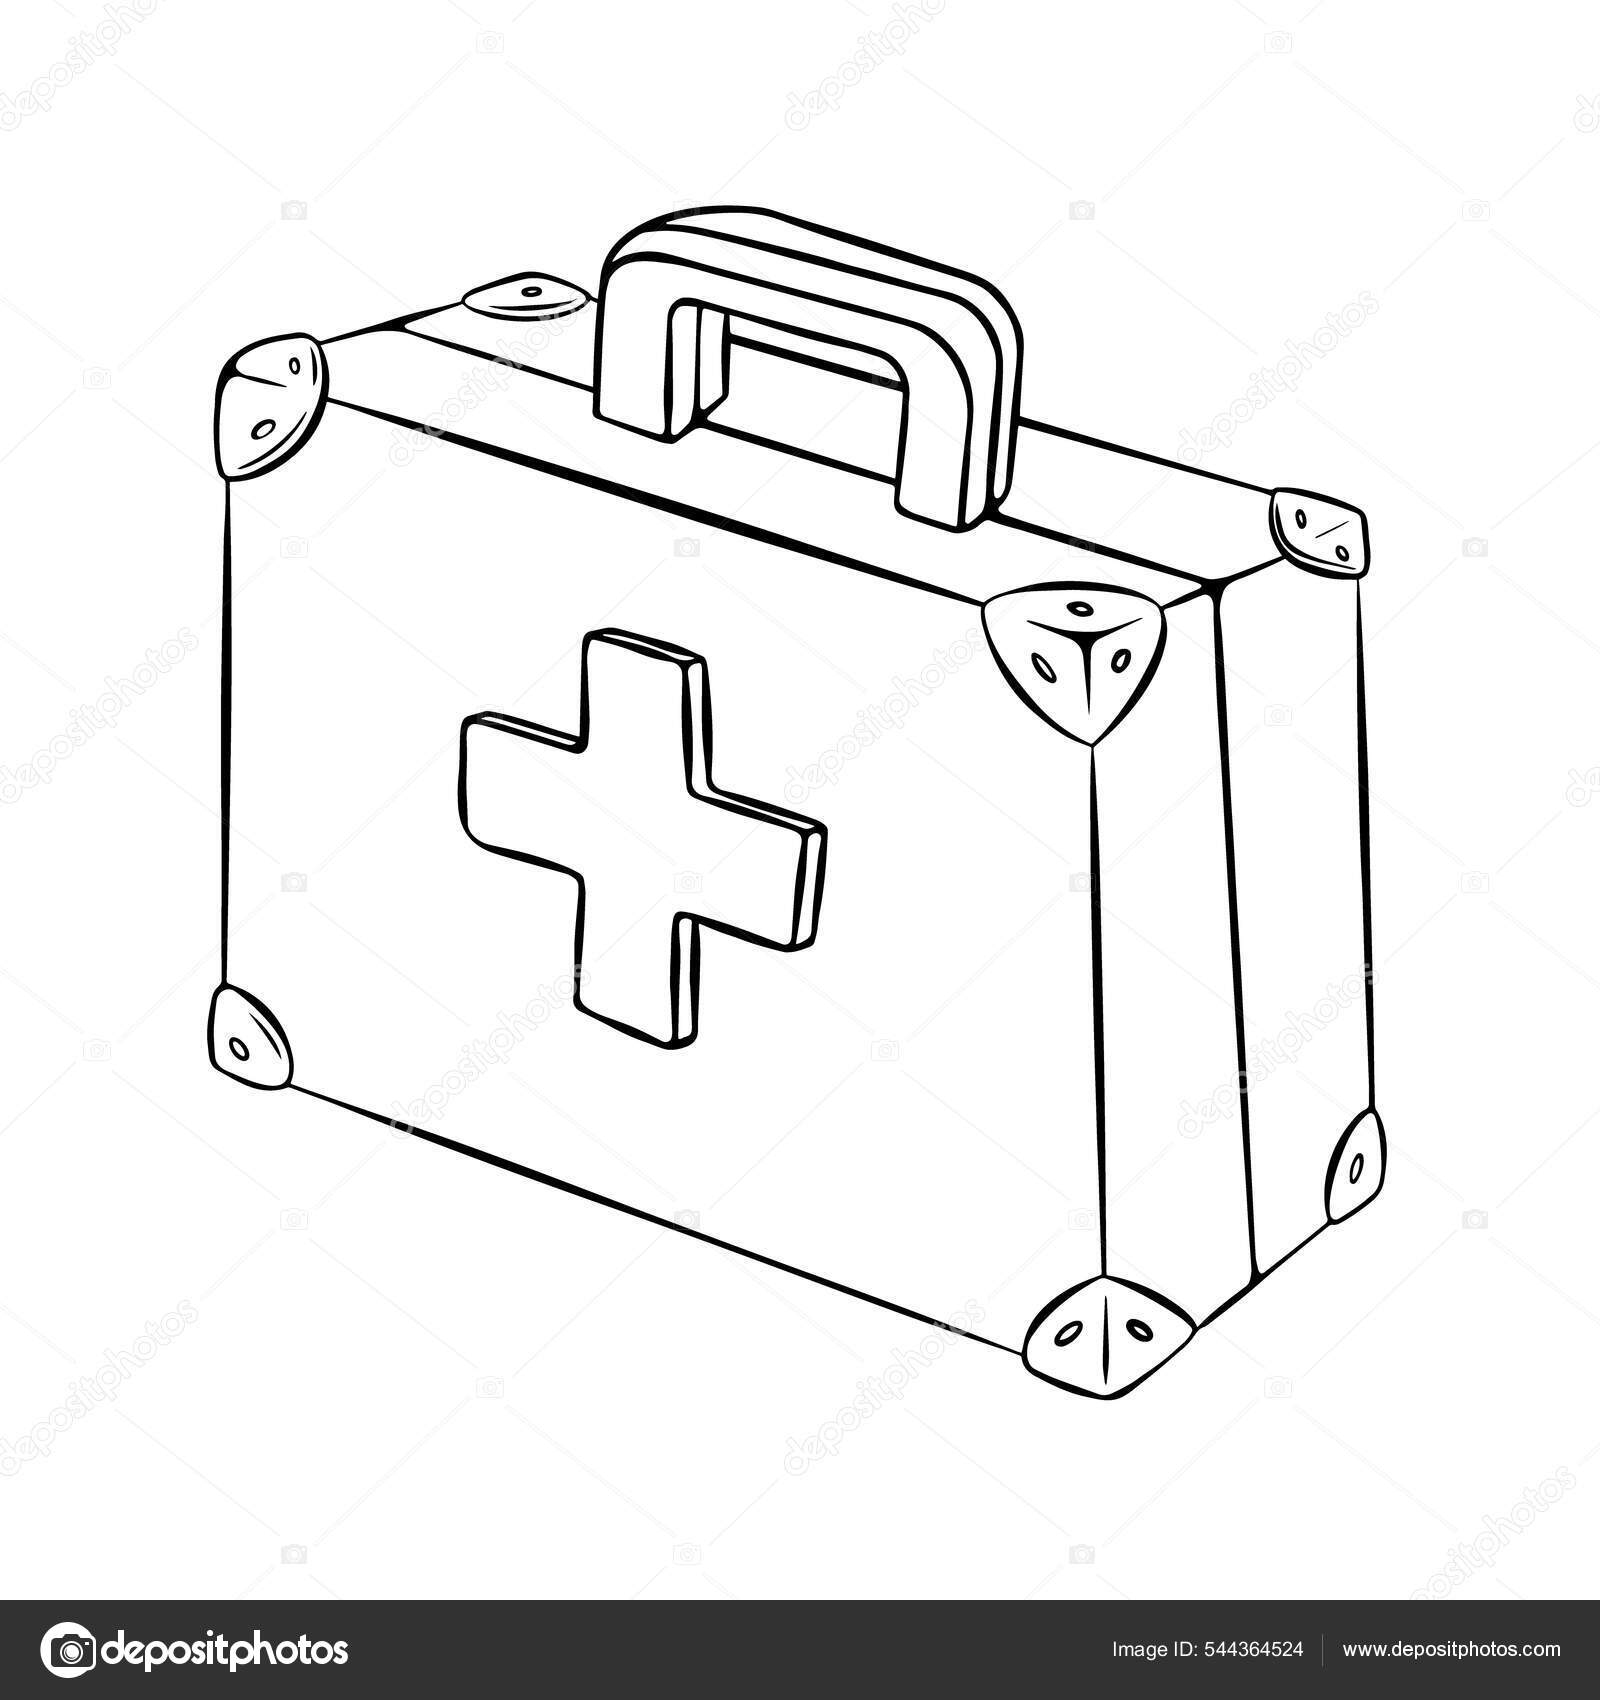 How to draw first aid kit easily/First aid kit box drawing - YouTube-saigonsouth.com.vn